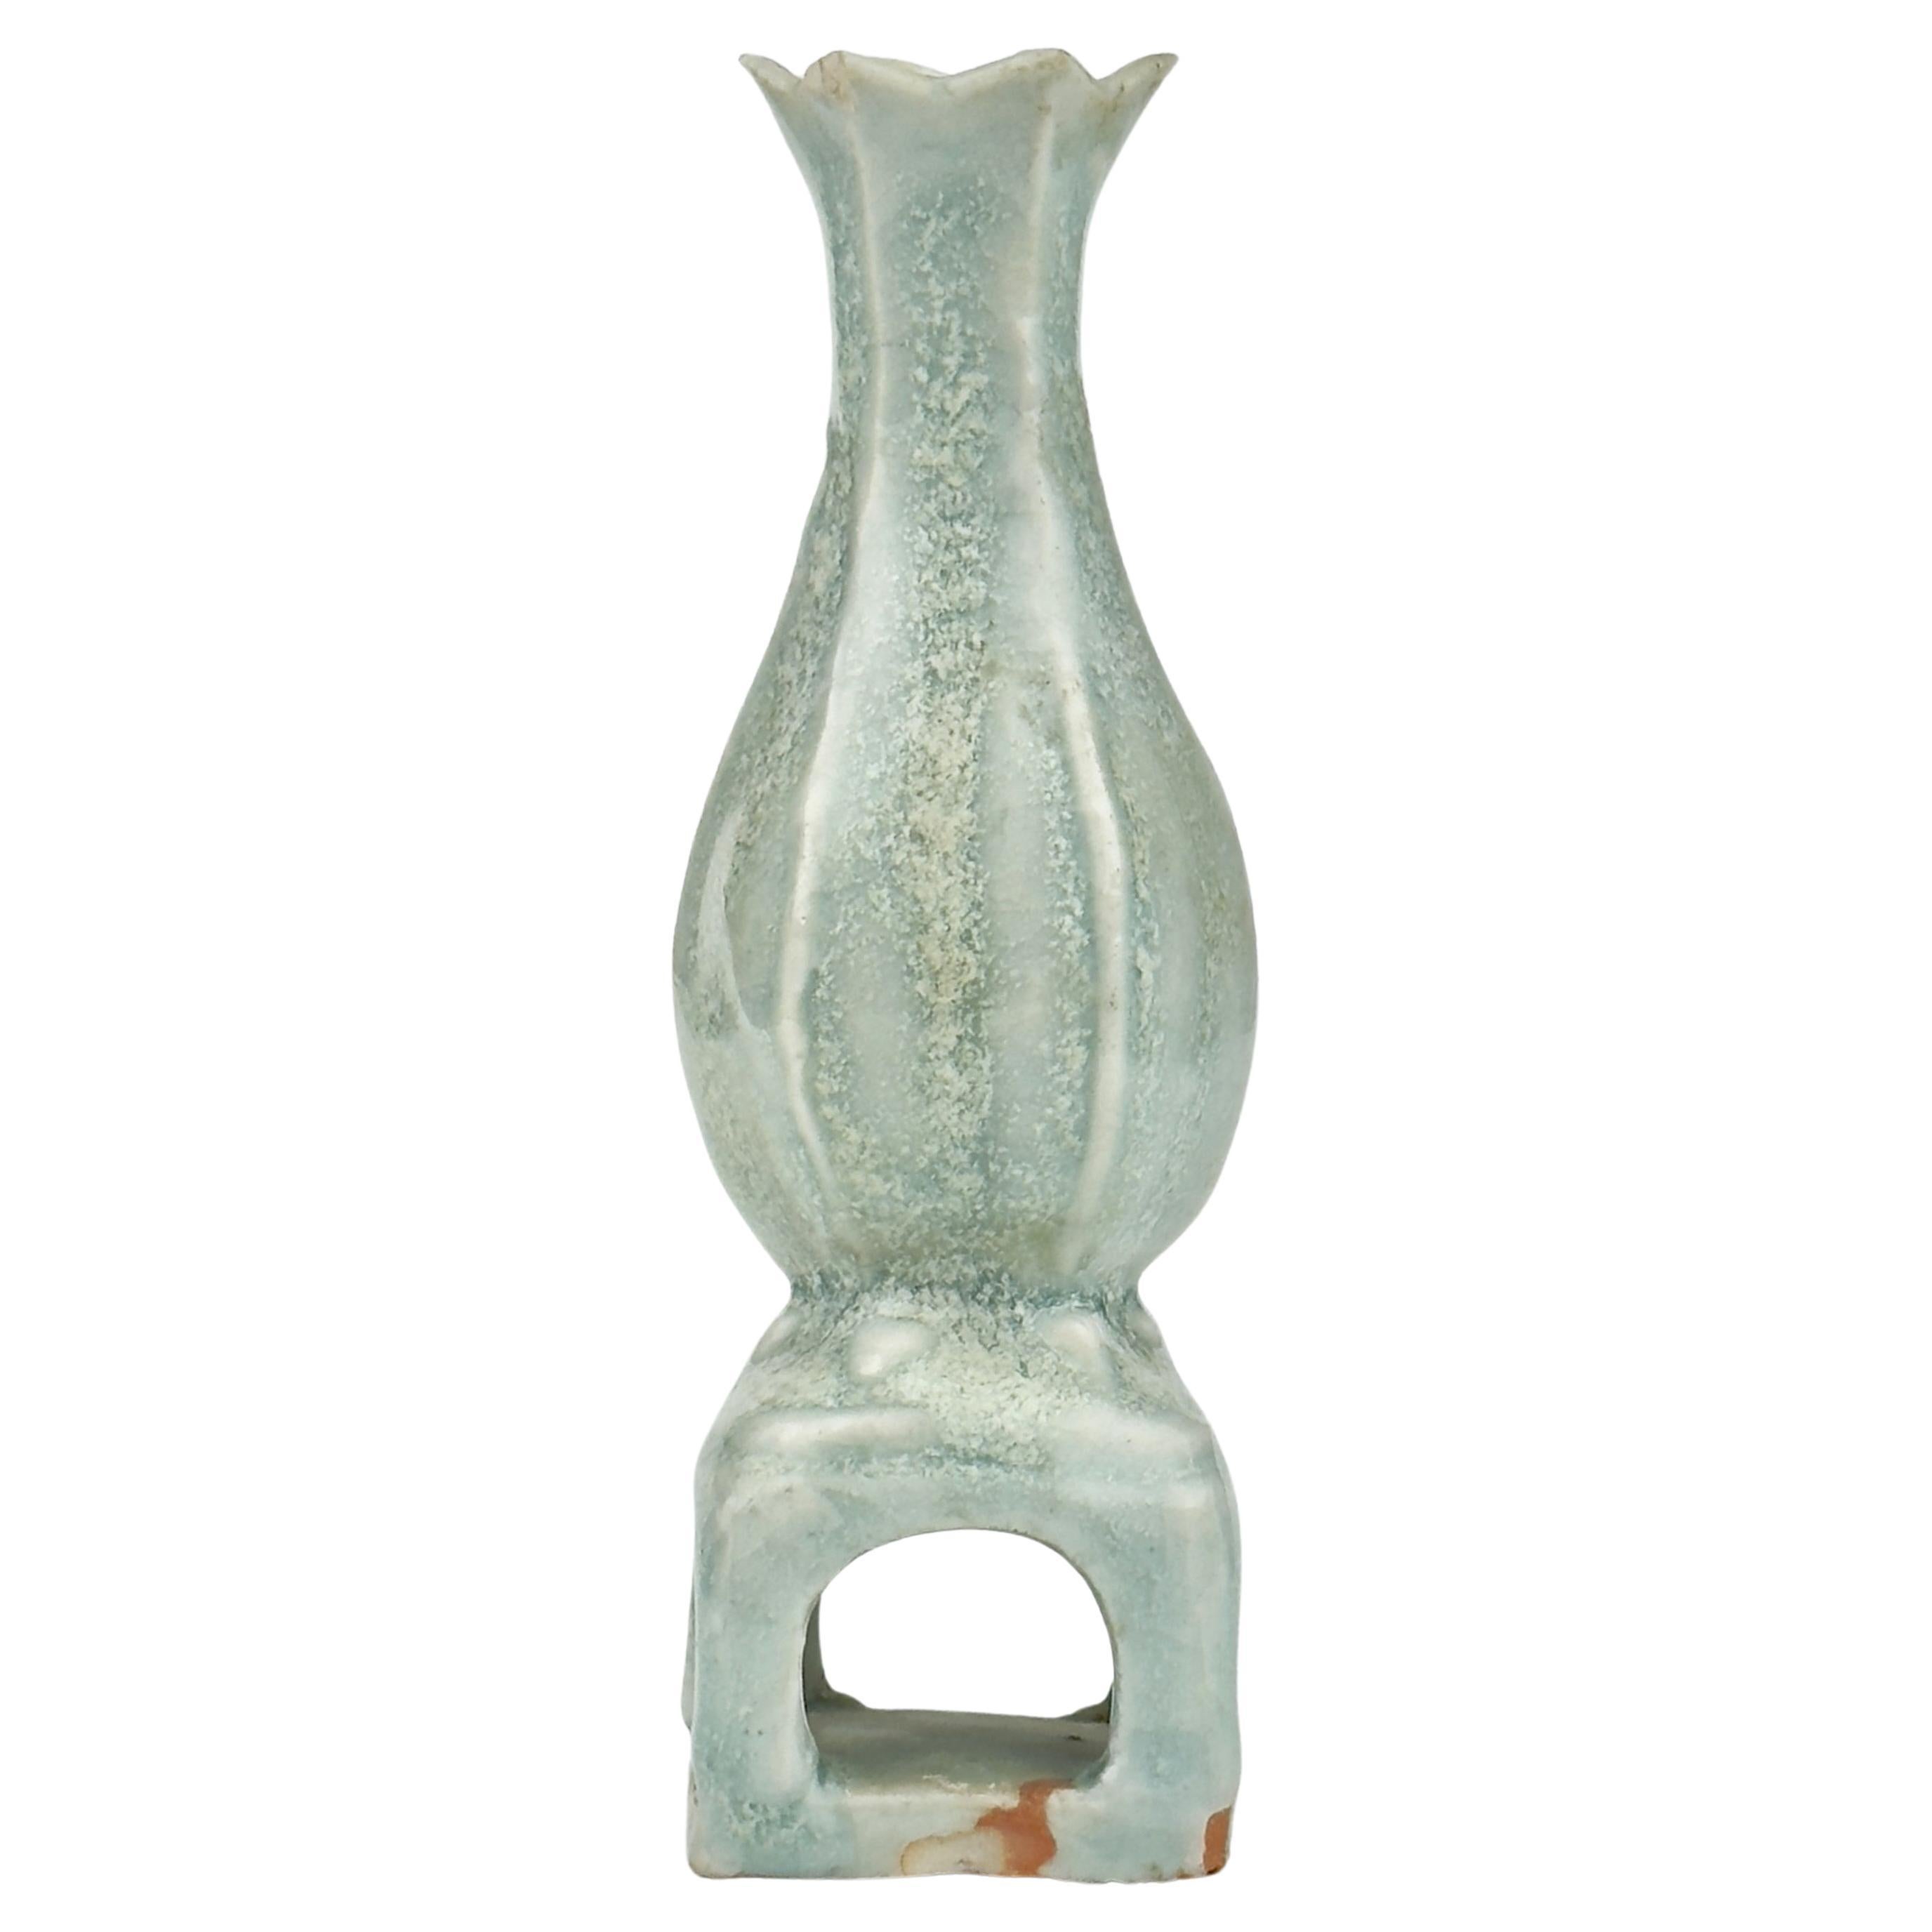 Small Qingbai Pear-Shaped Vase, Song-Yuan Dynasty(13-14th century) For Sale